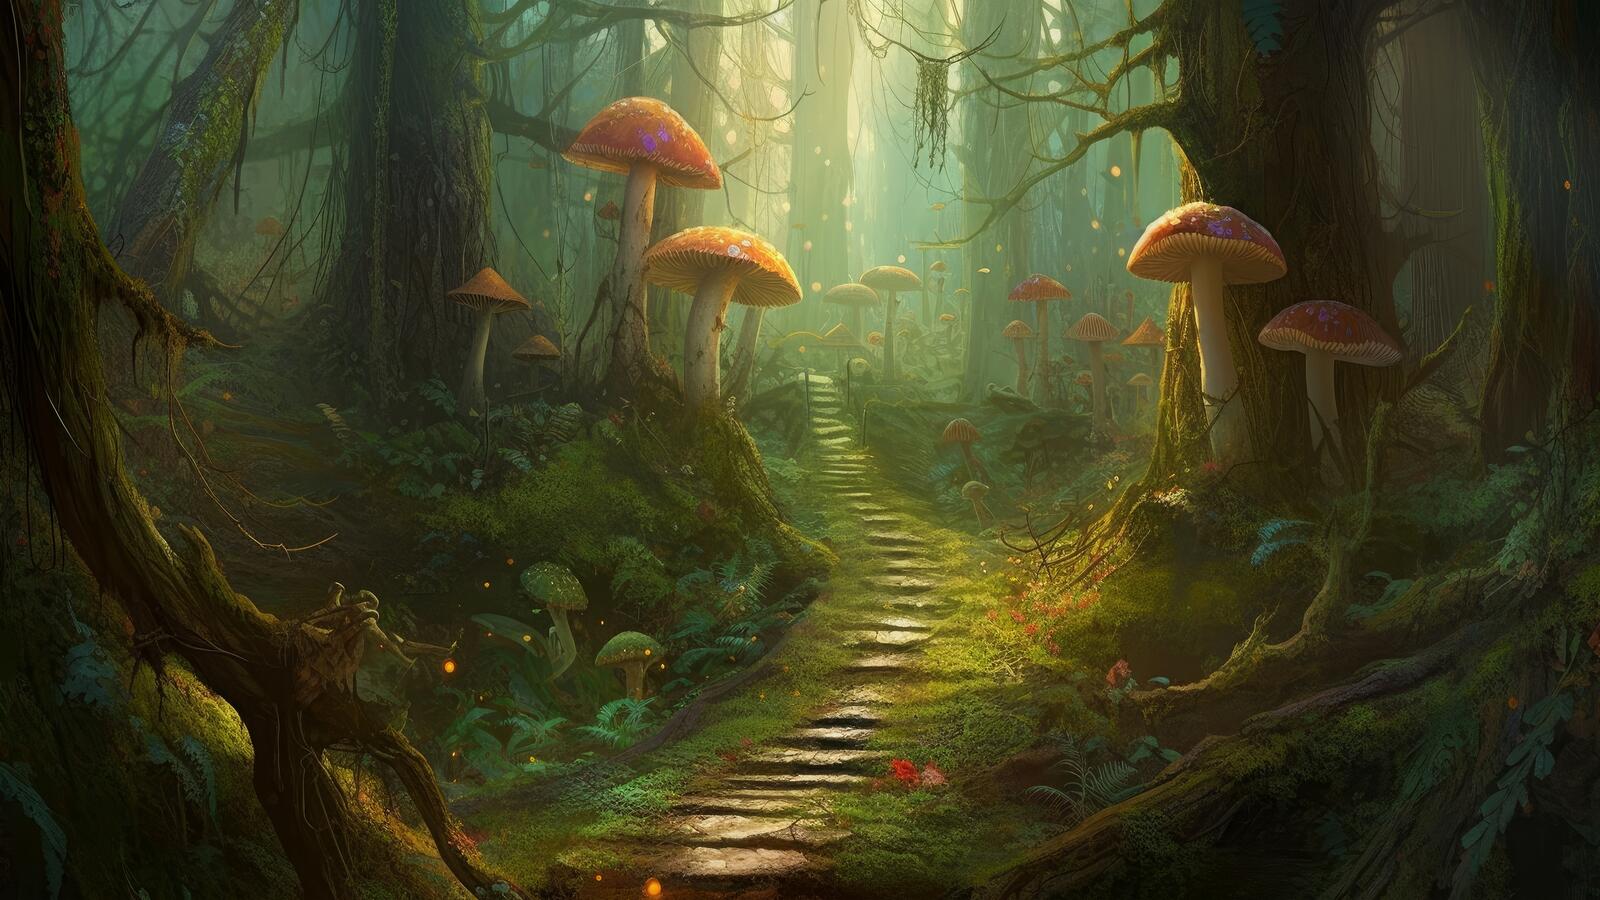 Free photo A fantasy forest trail with big mushrooms